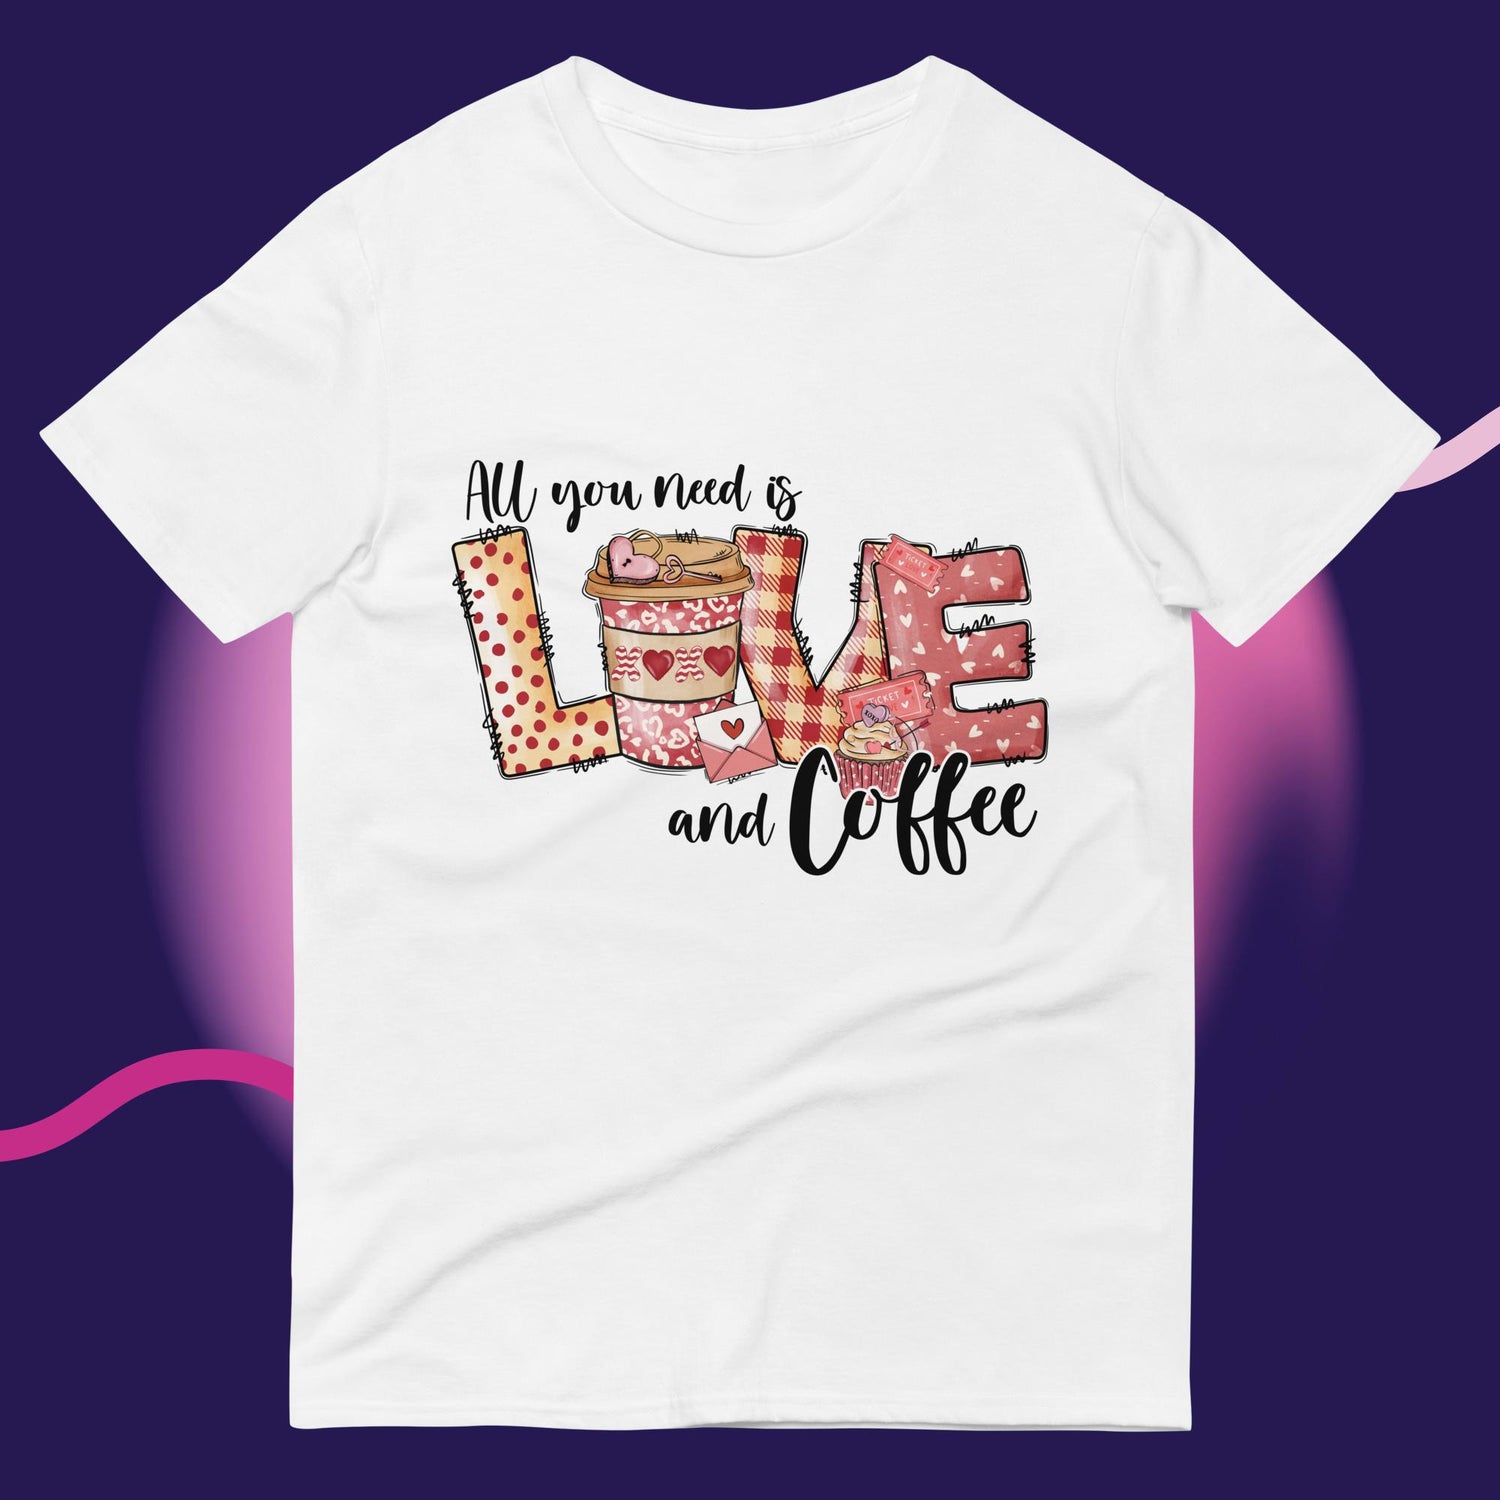 Sparkle-kiss-creations-all-you-need-is-love-coffee-t-shirt-white